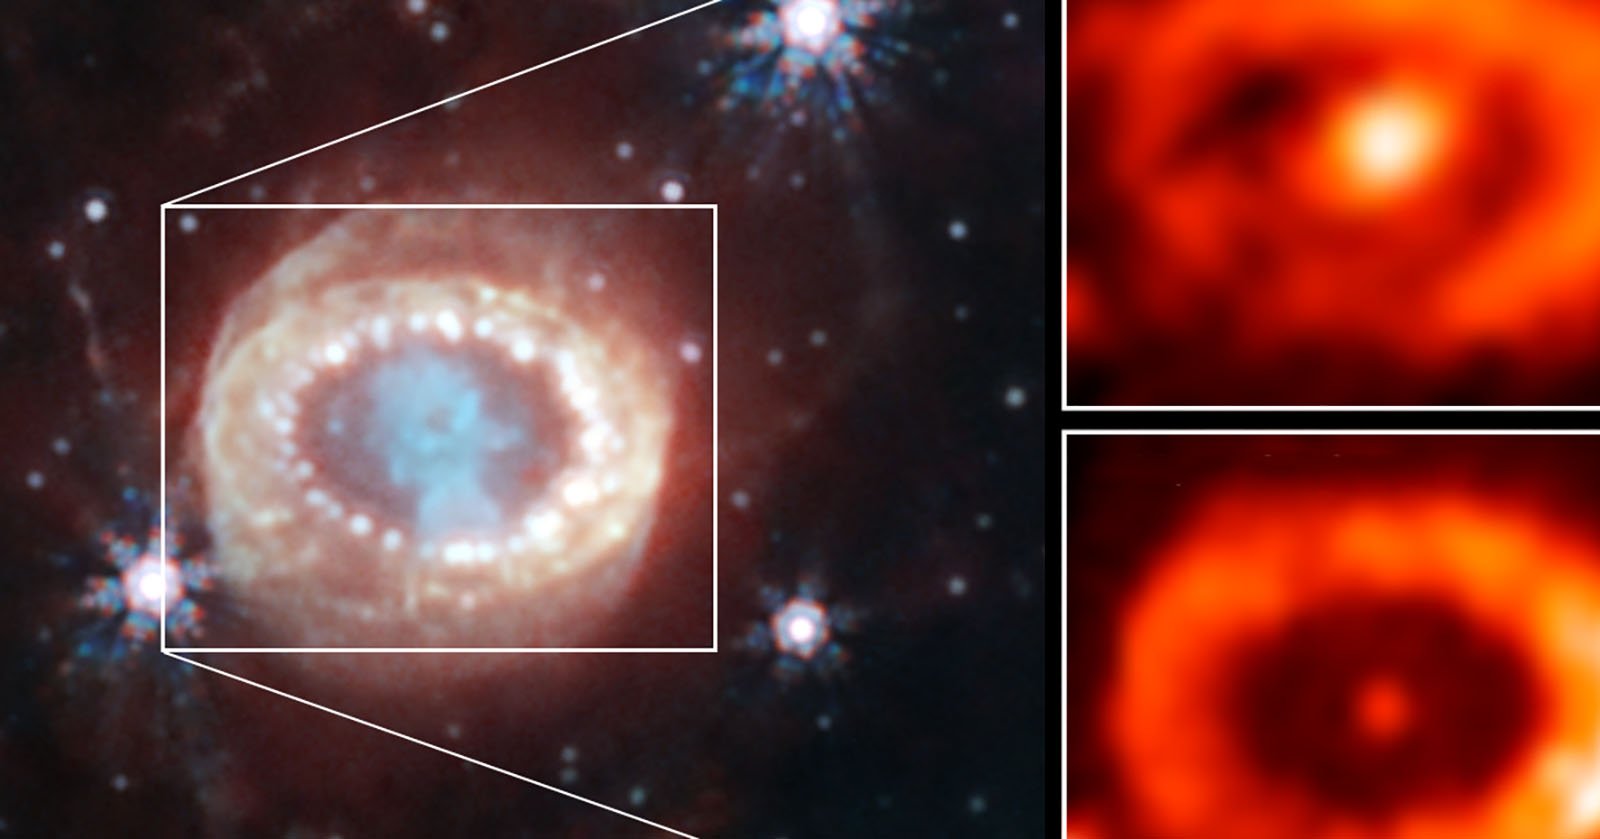 Webb Finds First Direct Evidence of a Neutron Star in a Supernova Remnant